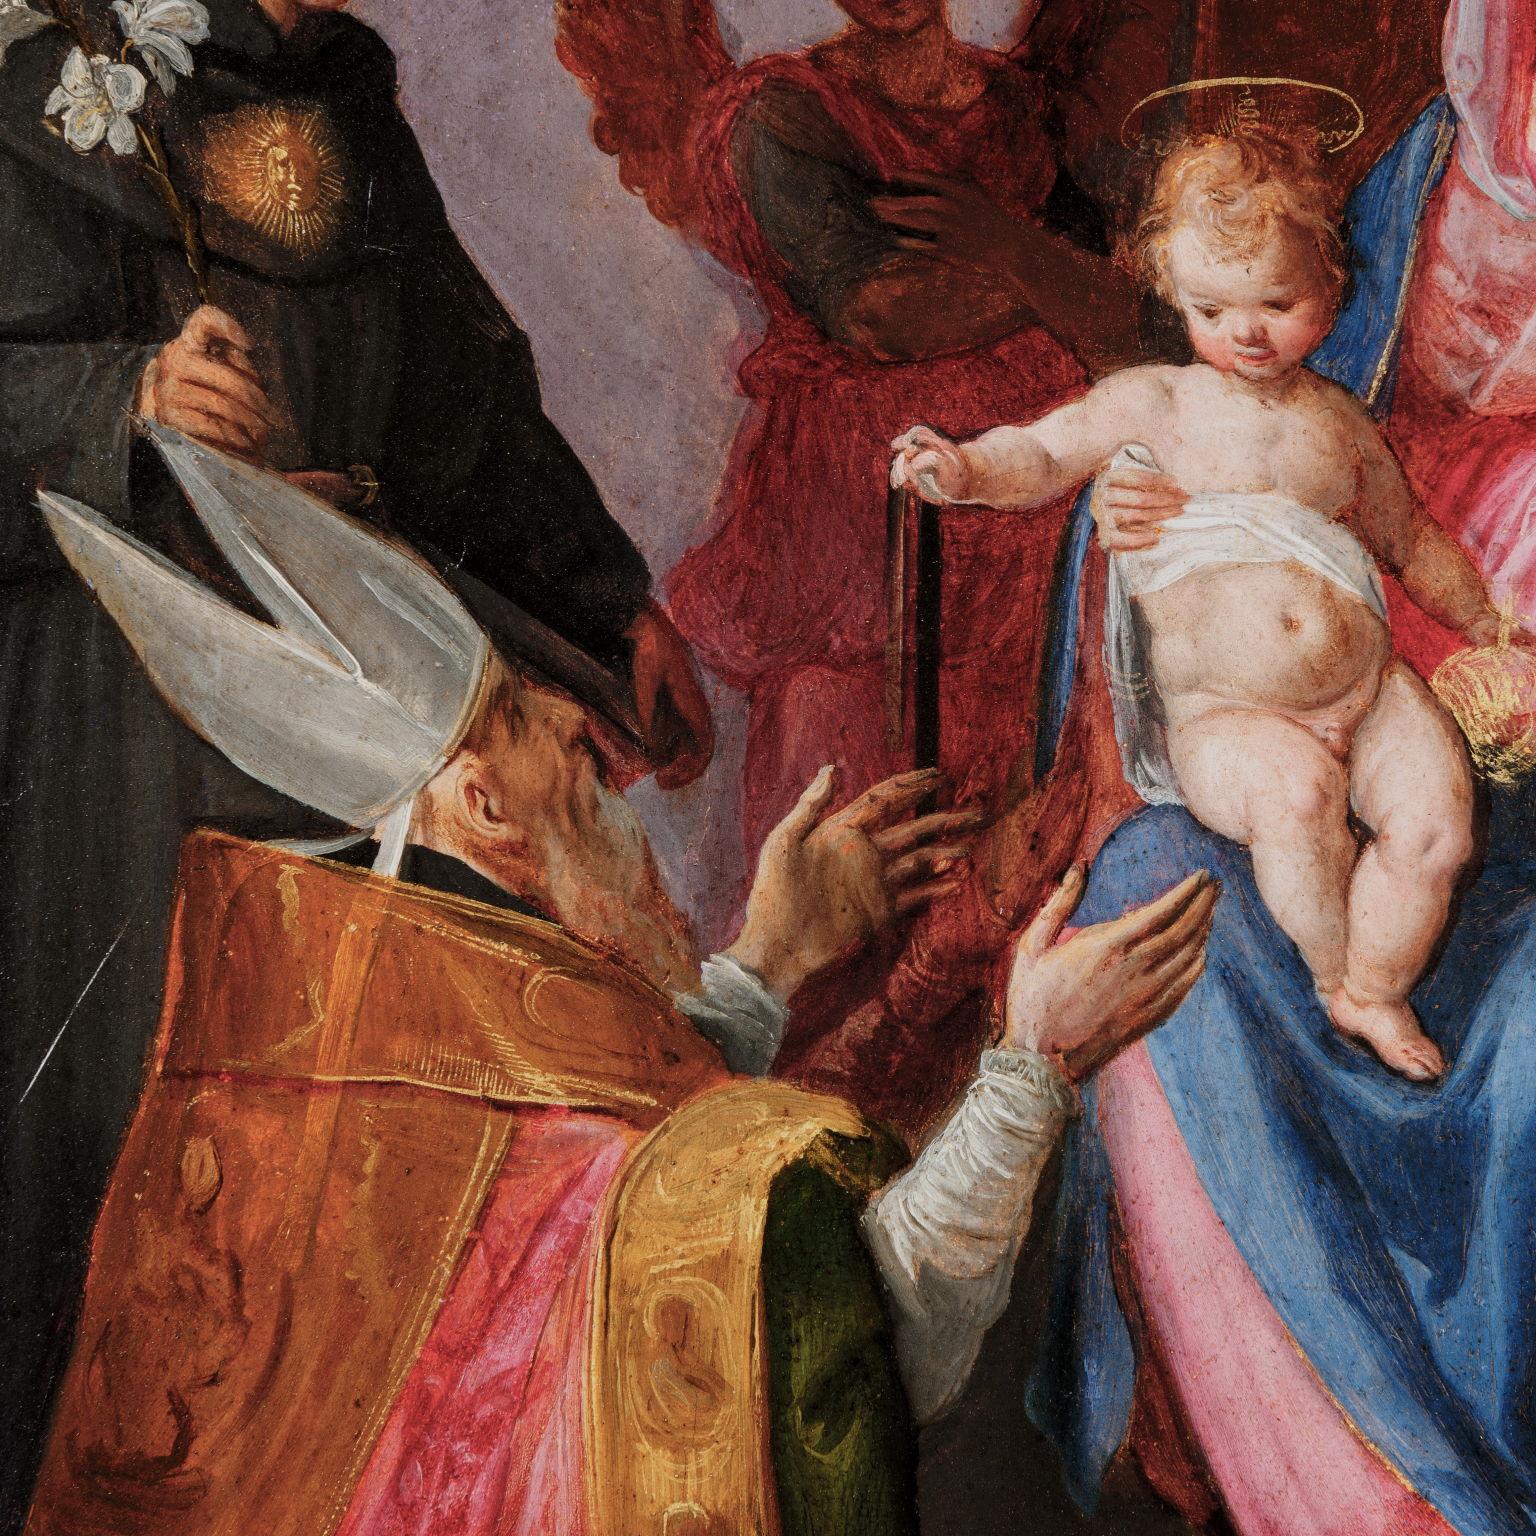 The painting features the enthroned Madonna and Child, two praying angels, and Saints Nicholas of Tolentino, Augustine, Luke the Evangelist, and Monica, below an elegant canopy. The work should be recognized as a preparatory sketch for a large